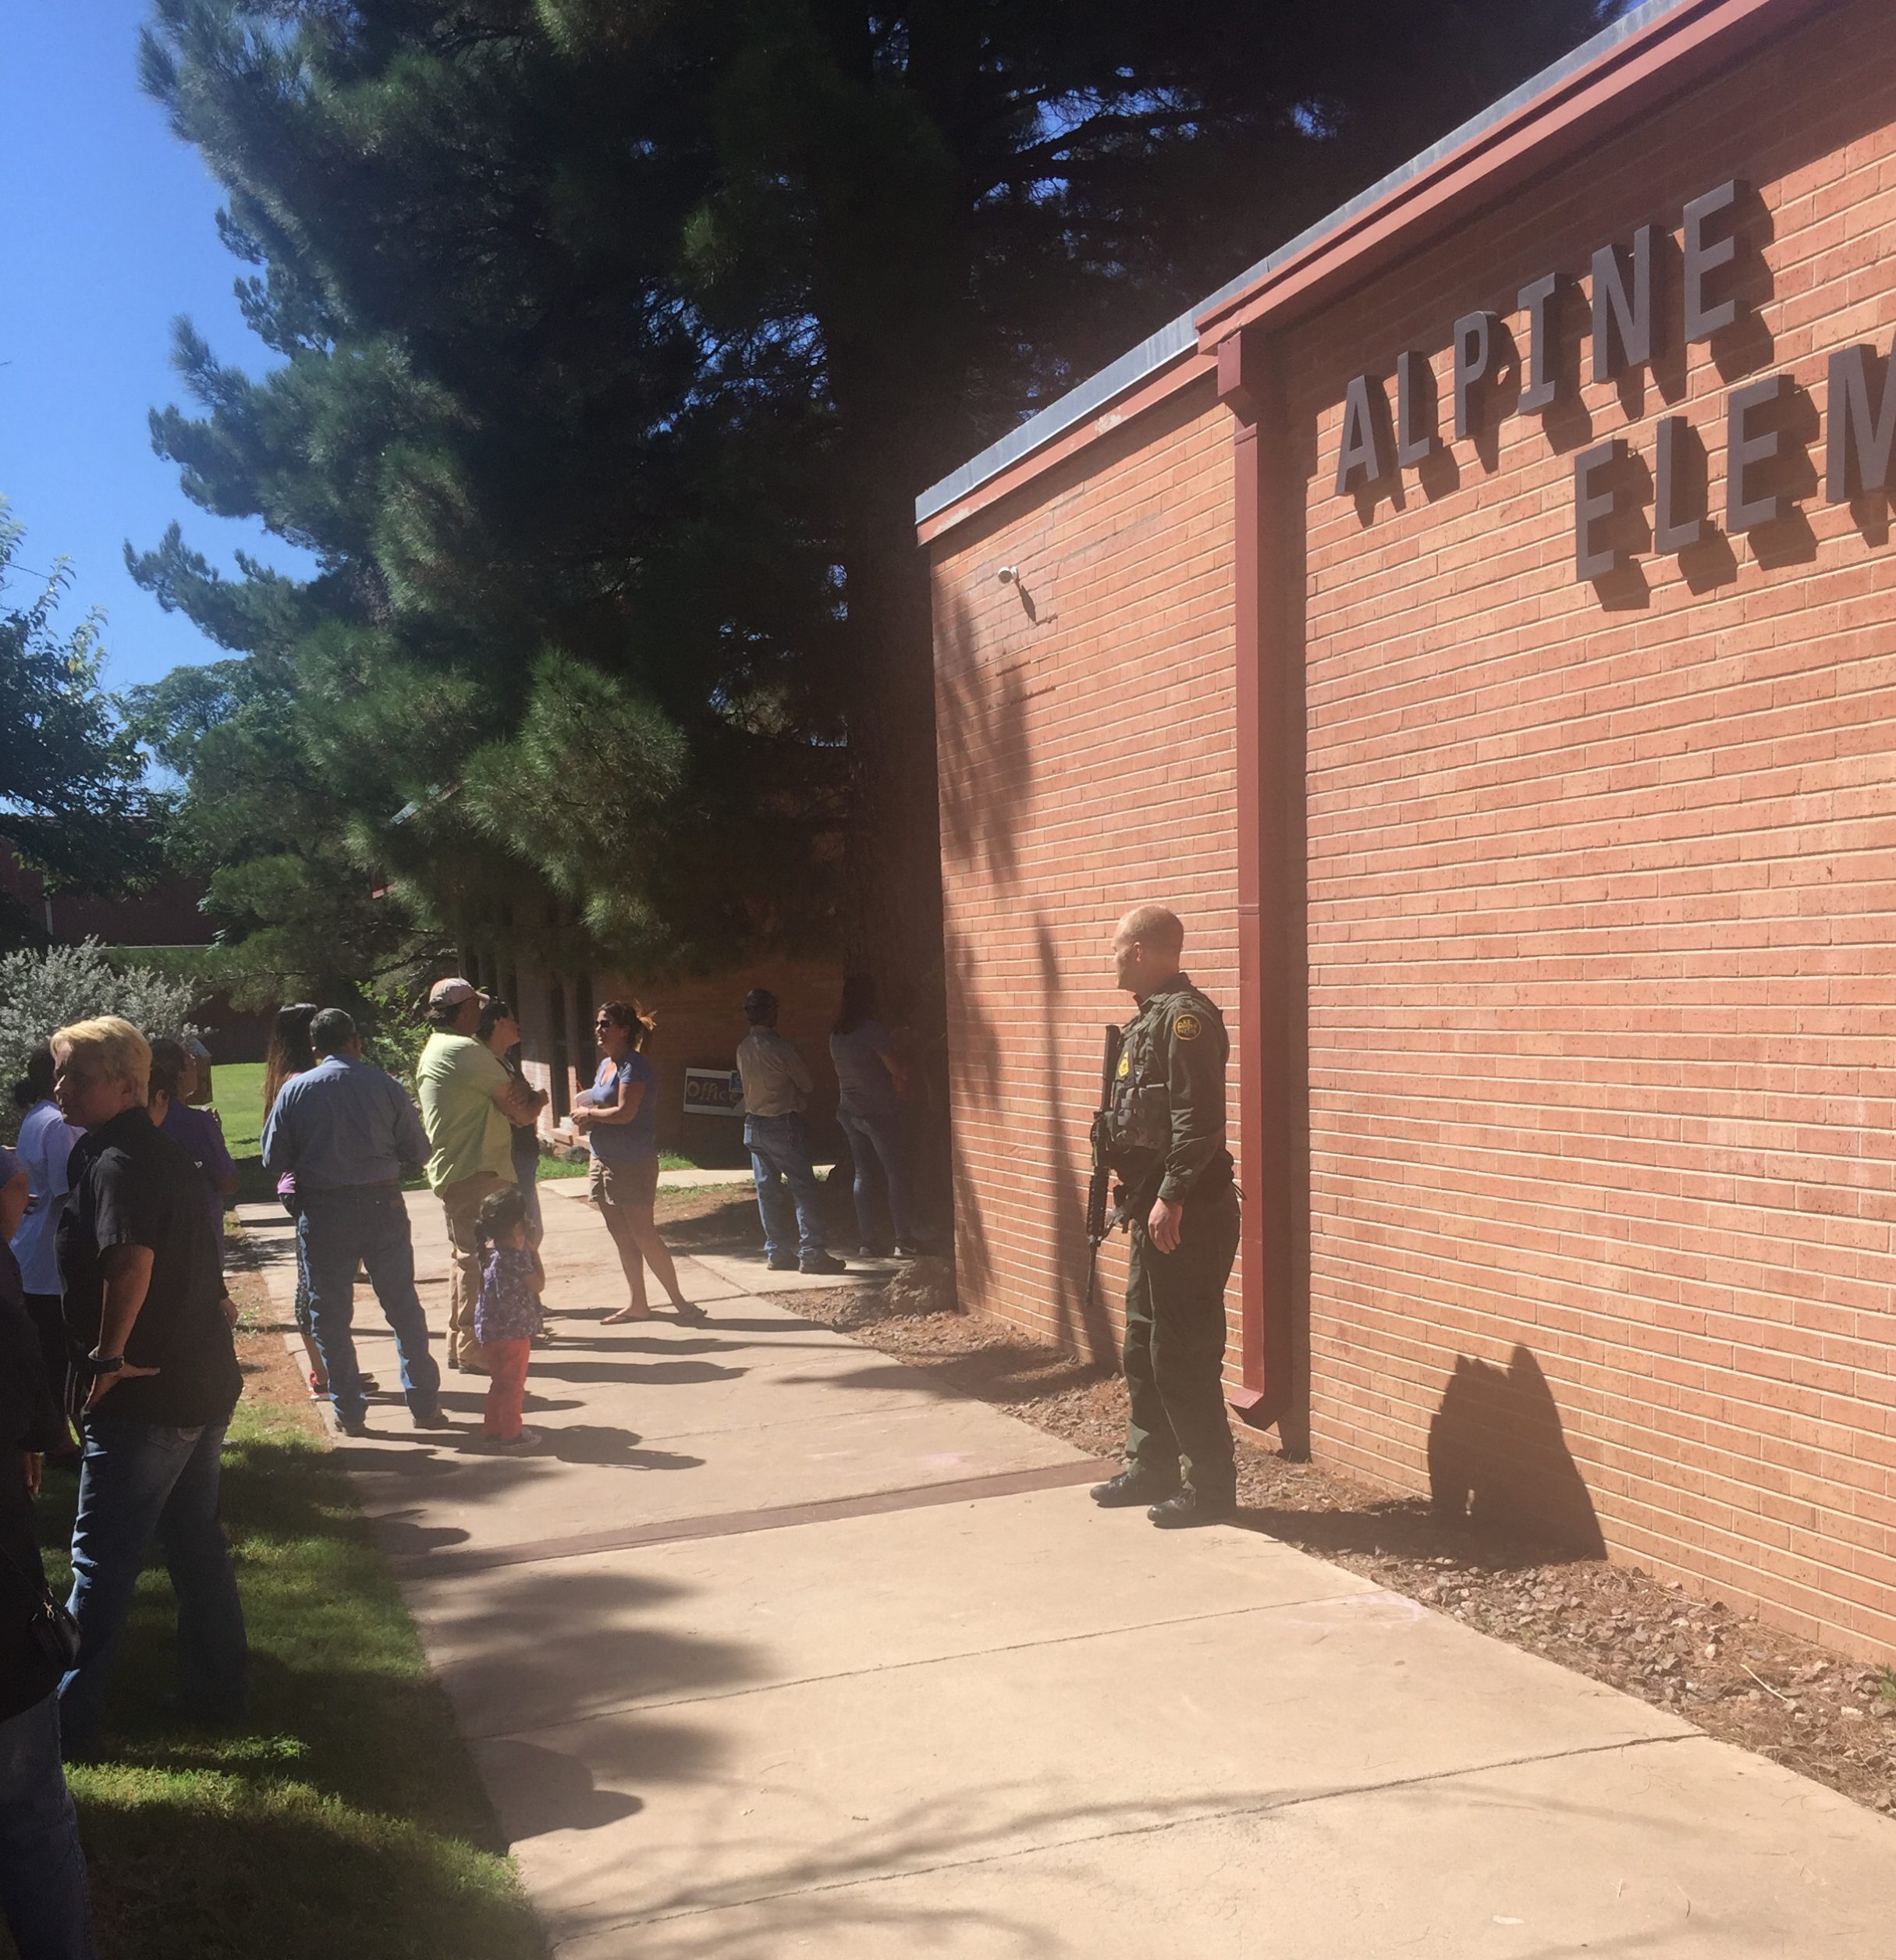 A Border Patrol agent keeps watch as parents arrive to take their children home from Alpine Elementary School after Thursday's shooting at nearby Alpine High School. 